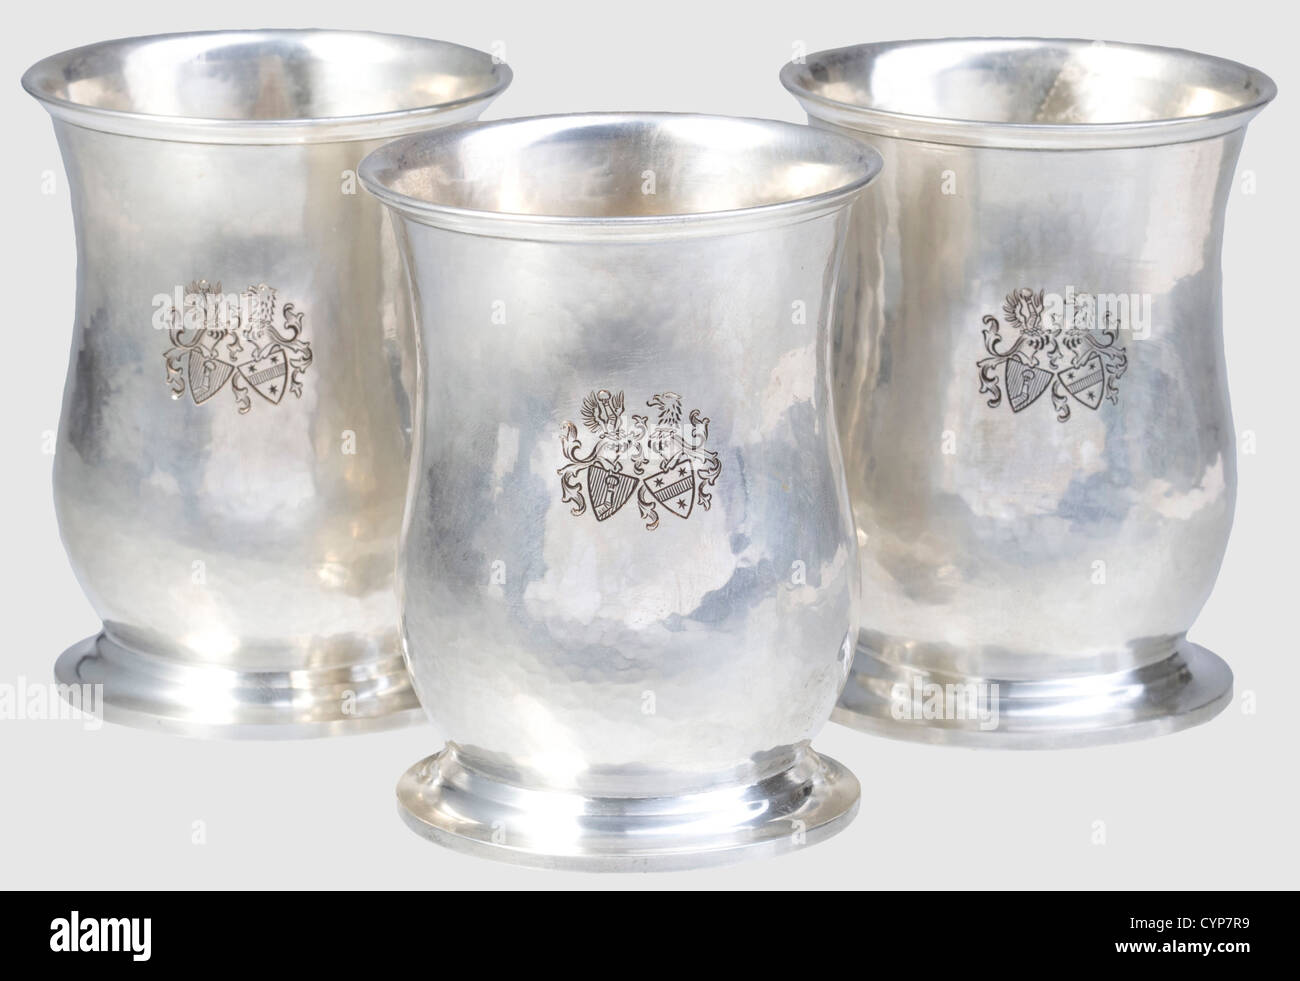 Hermann and Emmy Göring - three silver beakers, Silver, hand-hammered. Slightly bulbous design on a circular base. On the front side engraved alliance coat of arms, on the bottom master's mark as well as hallmark 'Kleemann - 800 - Handarbeit' (handmade). Height 8.8 cm each, weight 92 g each, historic, historical, 1930s, 1930s, 20th century, NS, National Socialism, Nazism, Third Reich, German Reich, Germany, German, National Socialist, Nazi, Nazi period, fascism, vessel, vessels, object, objects, stills, clipping, clippings, cut out, cut-out, cut-outs, Additional-Rights-Clearences-Not Available Stock Photo